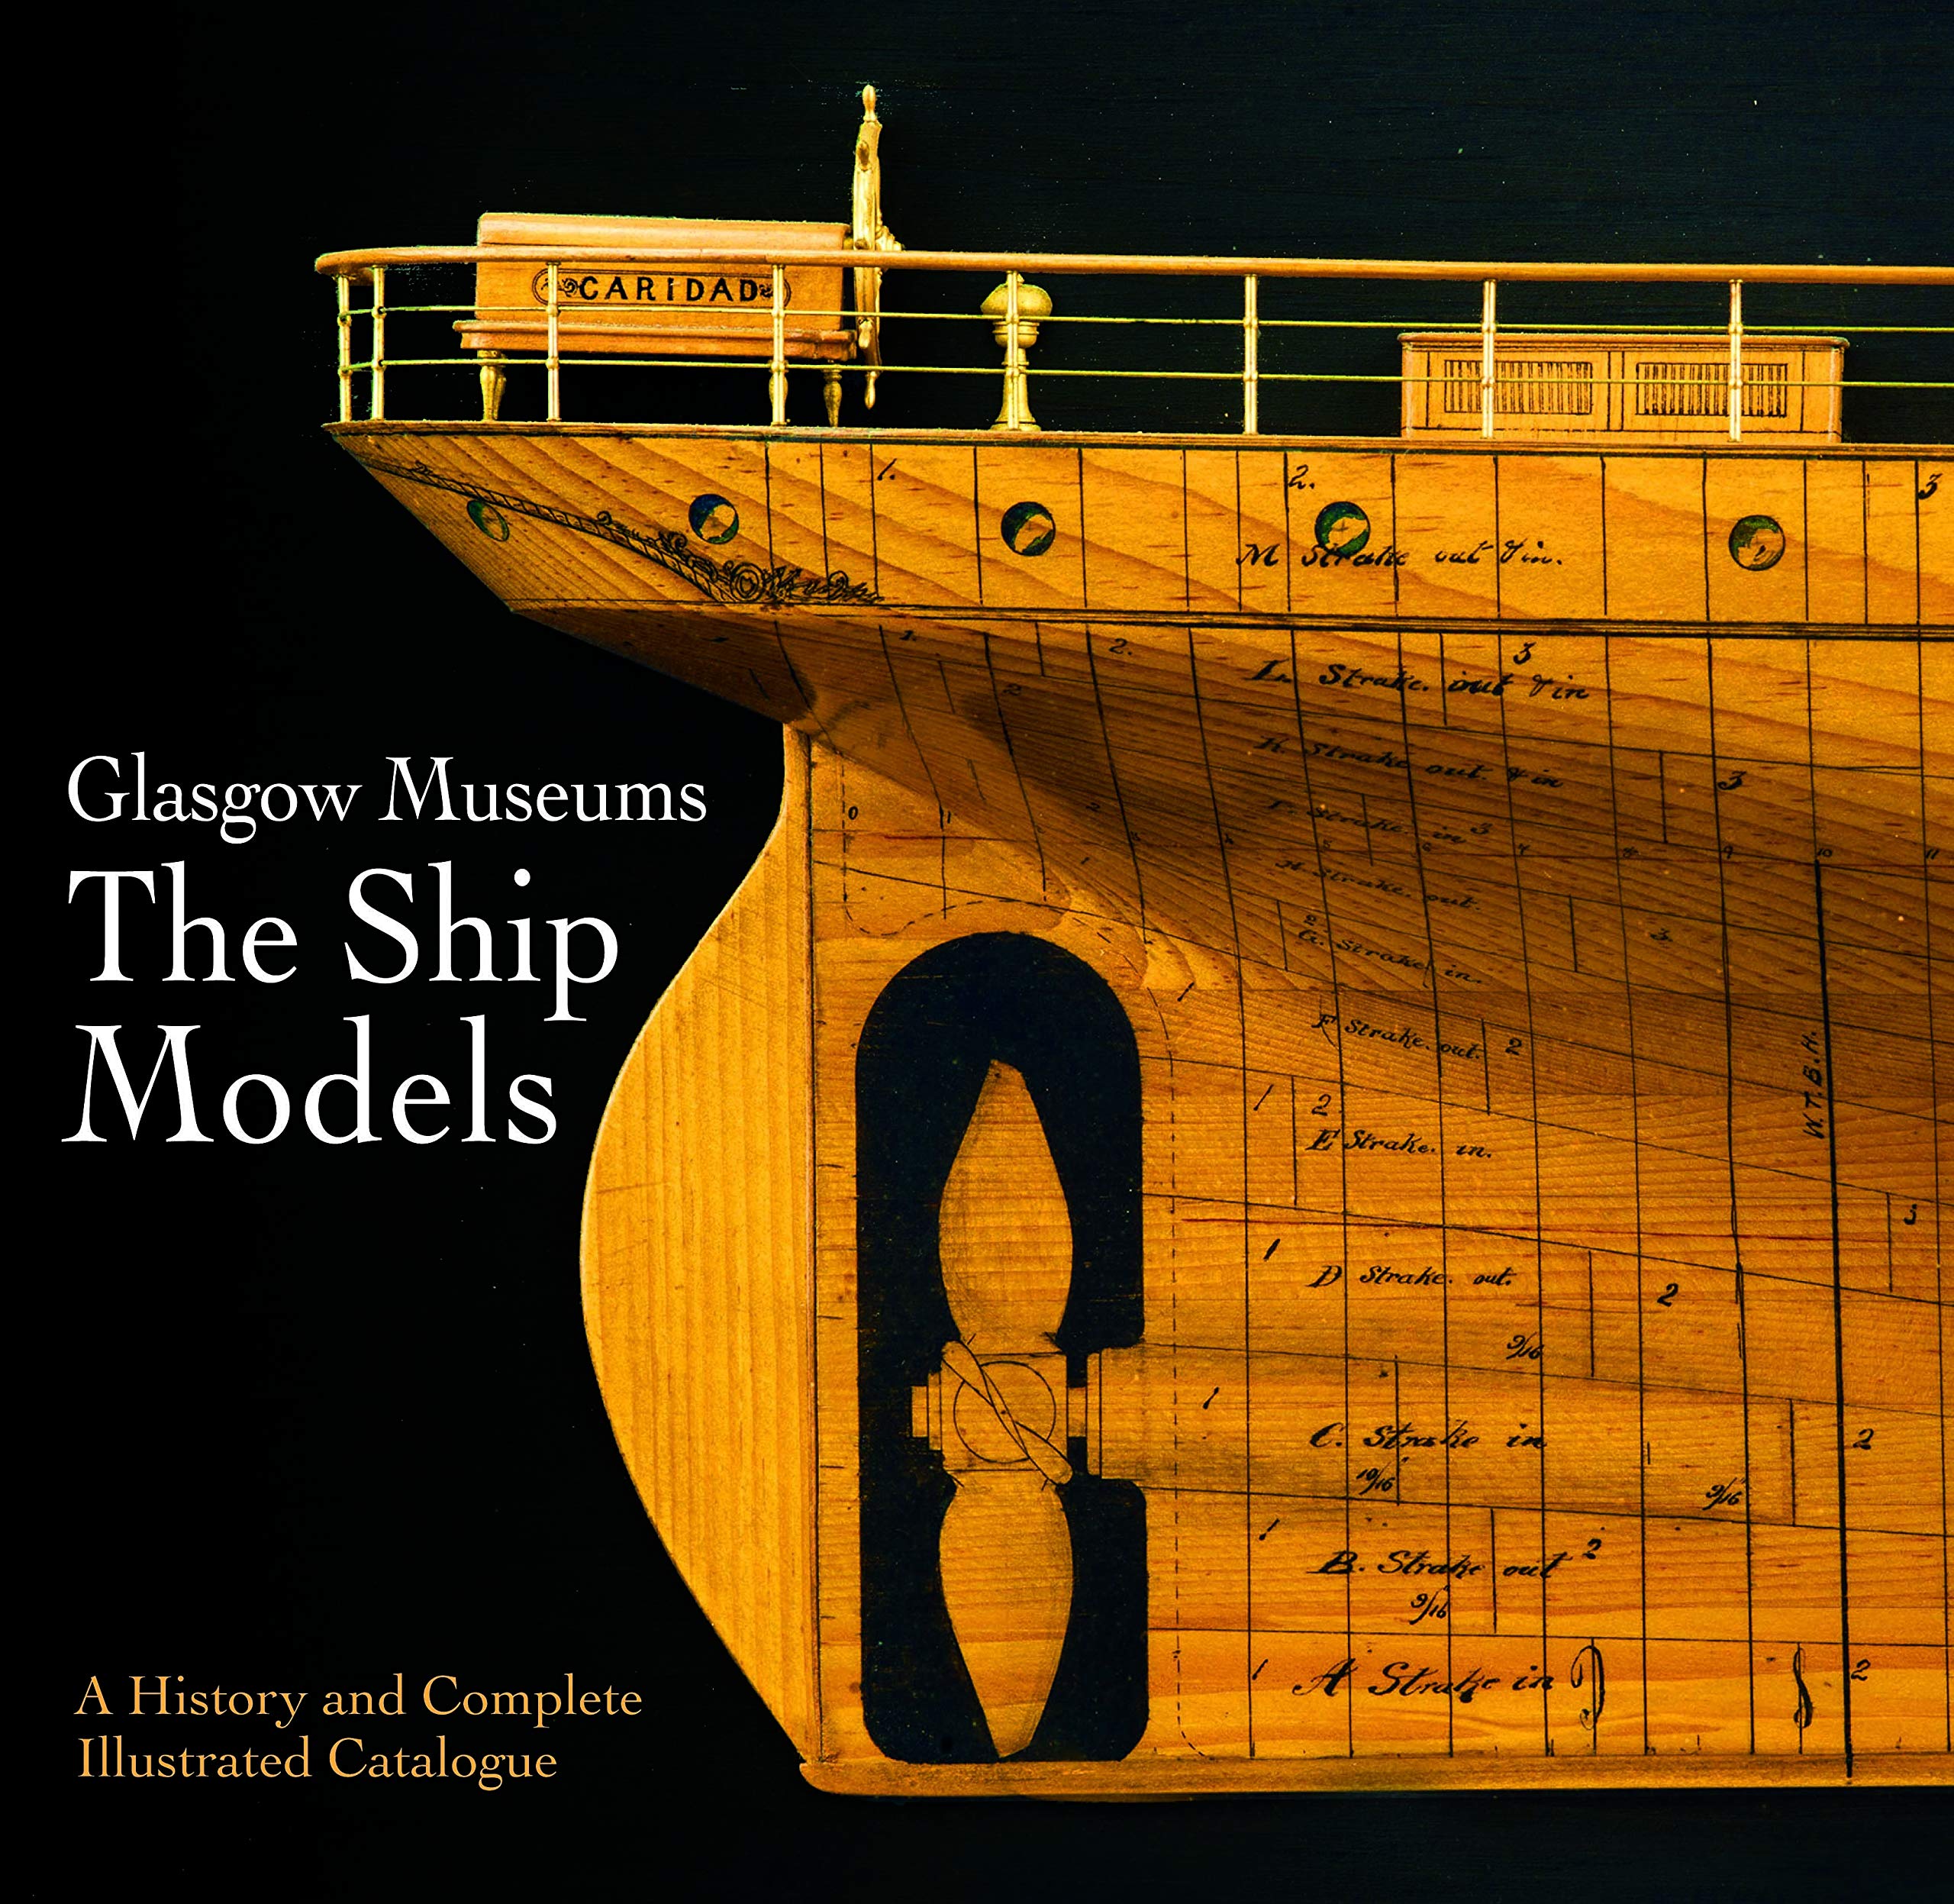 Glasgow museums: the ship models